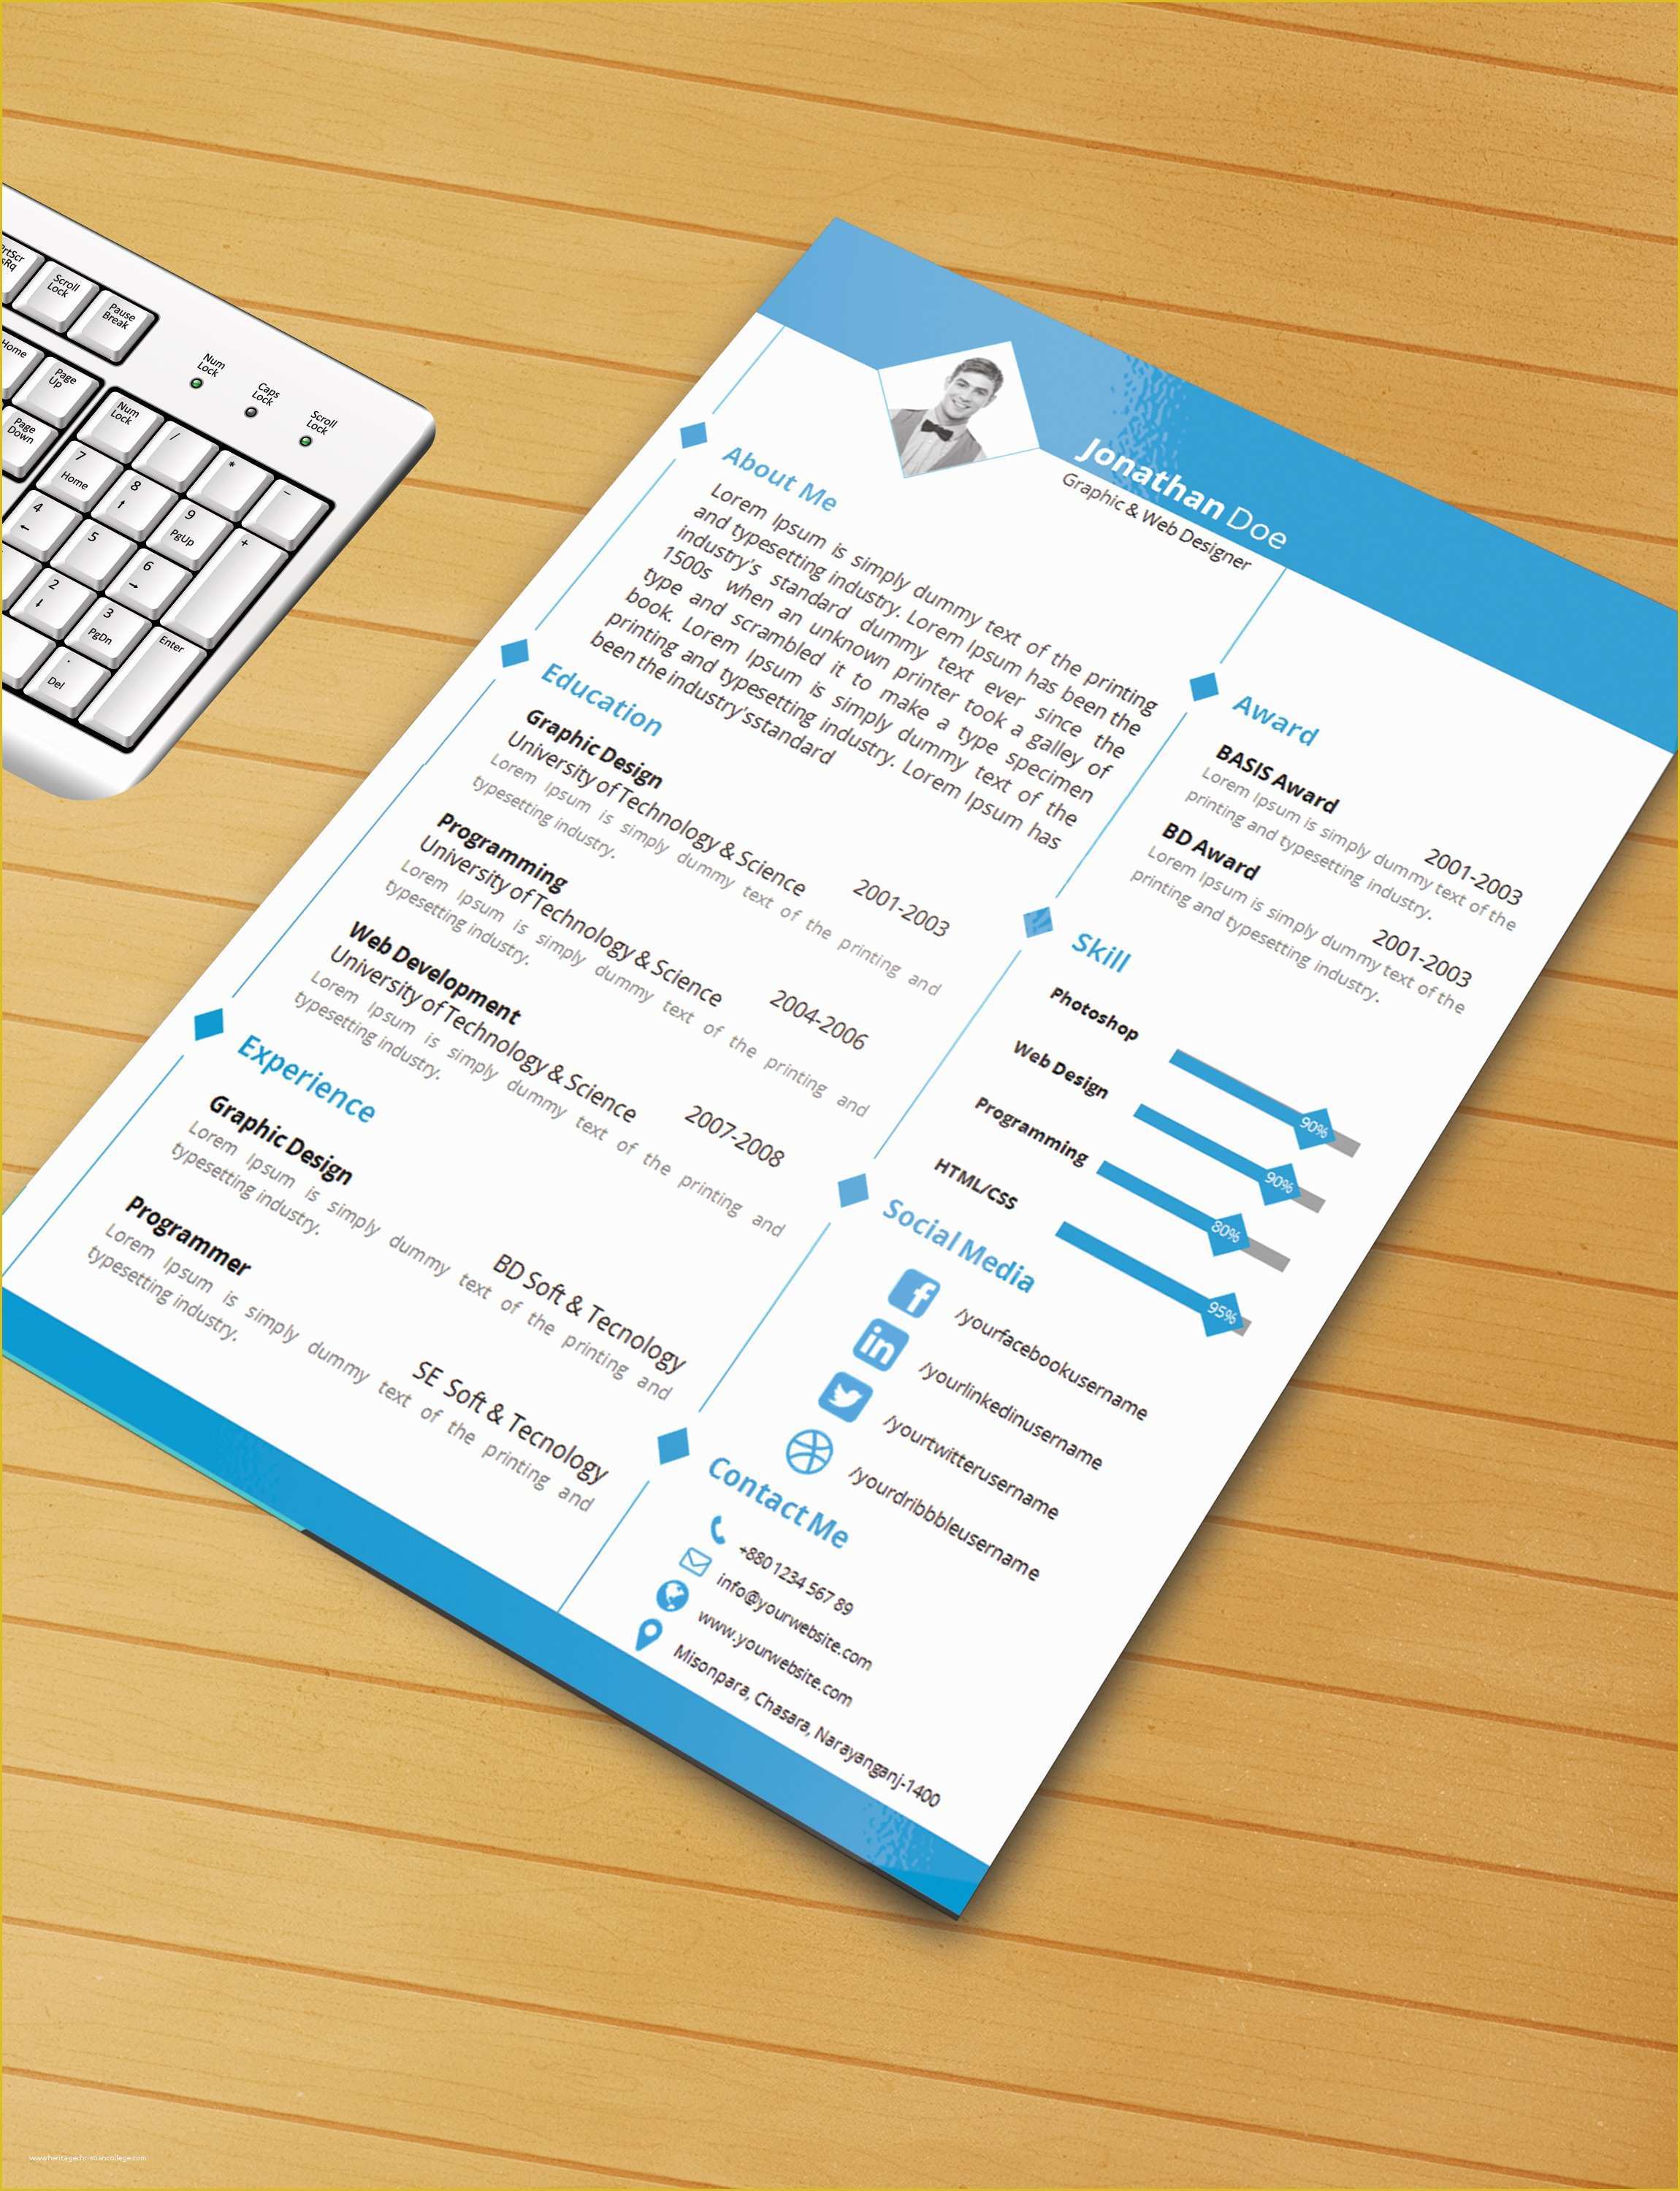 Ms Word Templates Free Of Resume Template with Ms Word File Free Download by